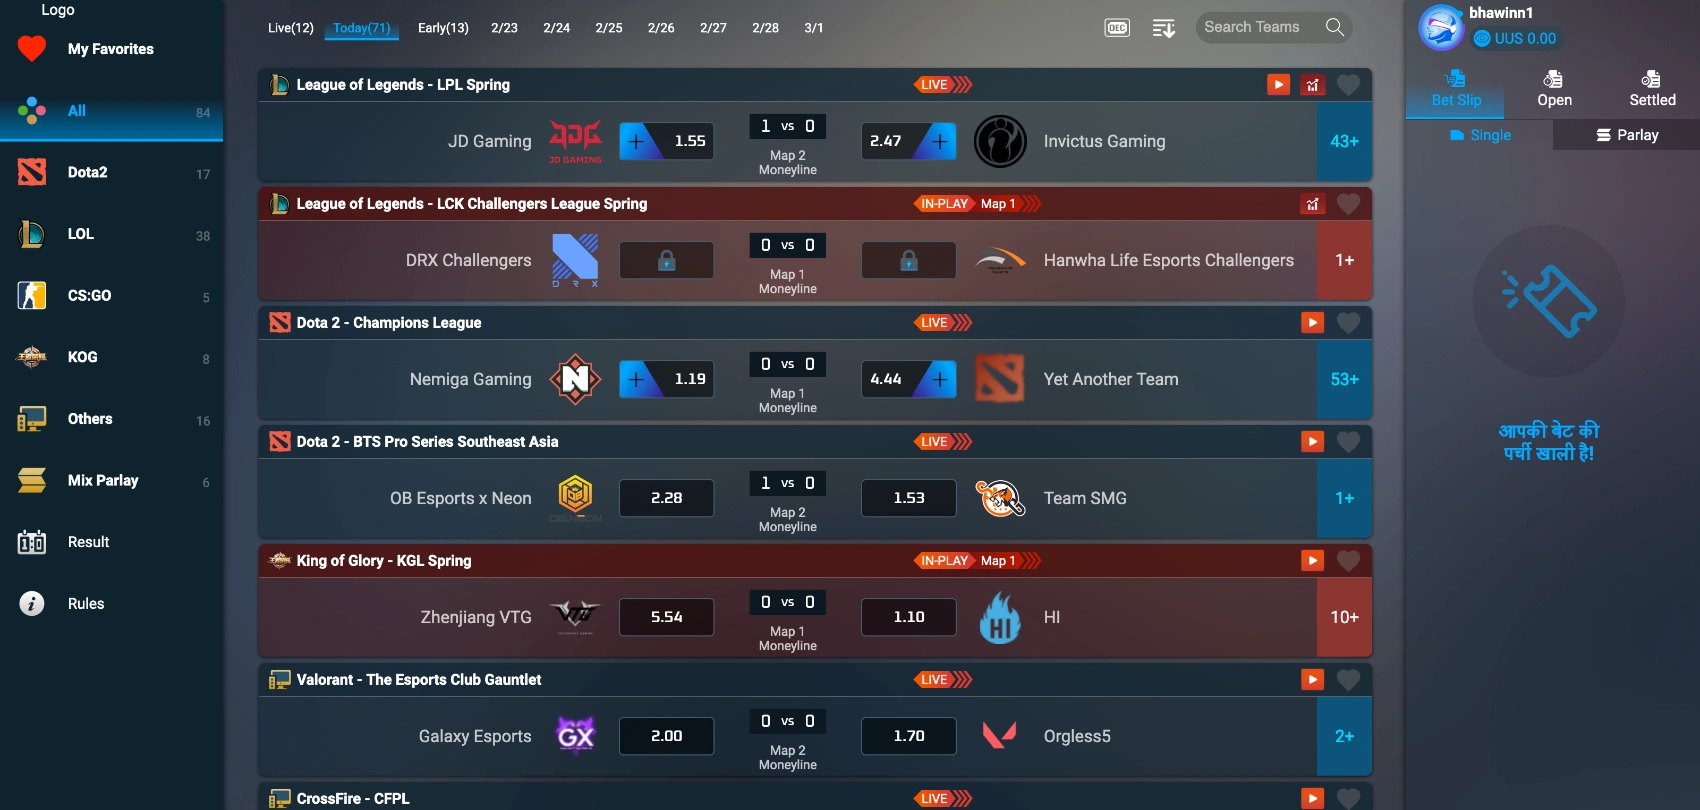 12Bet allows you to bet on eSports competitions